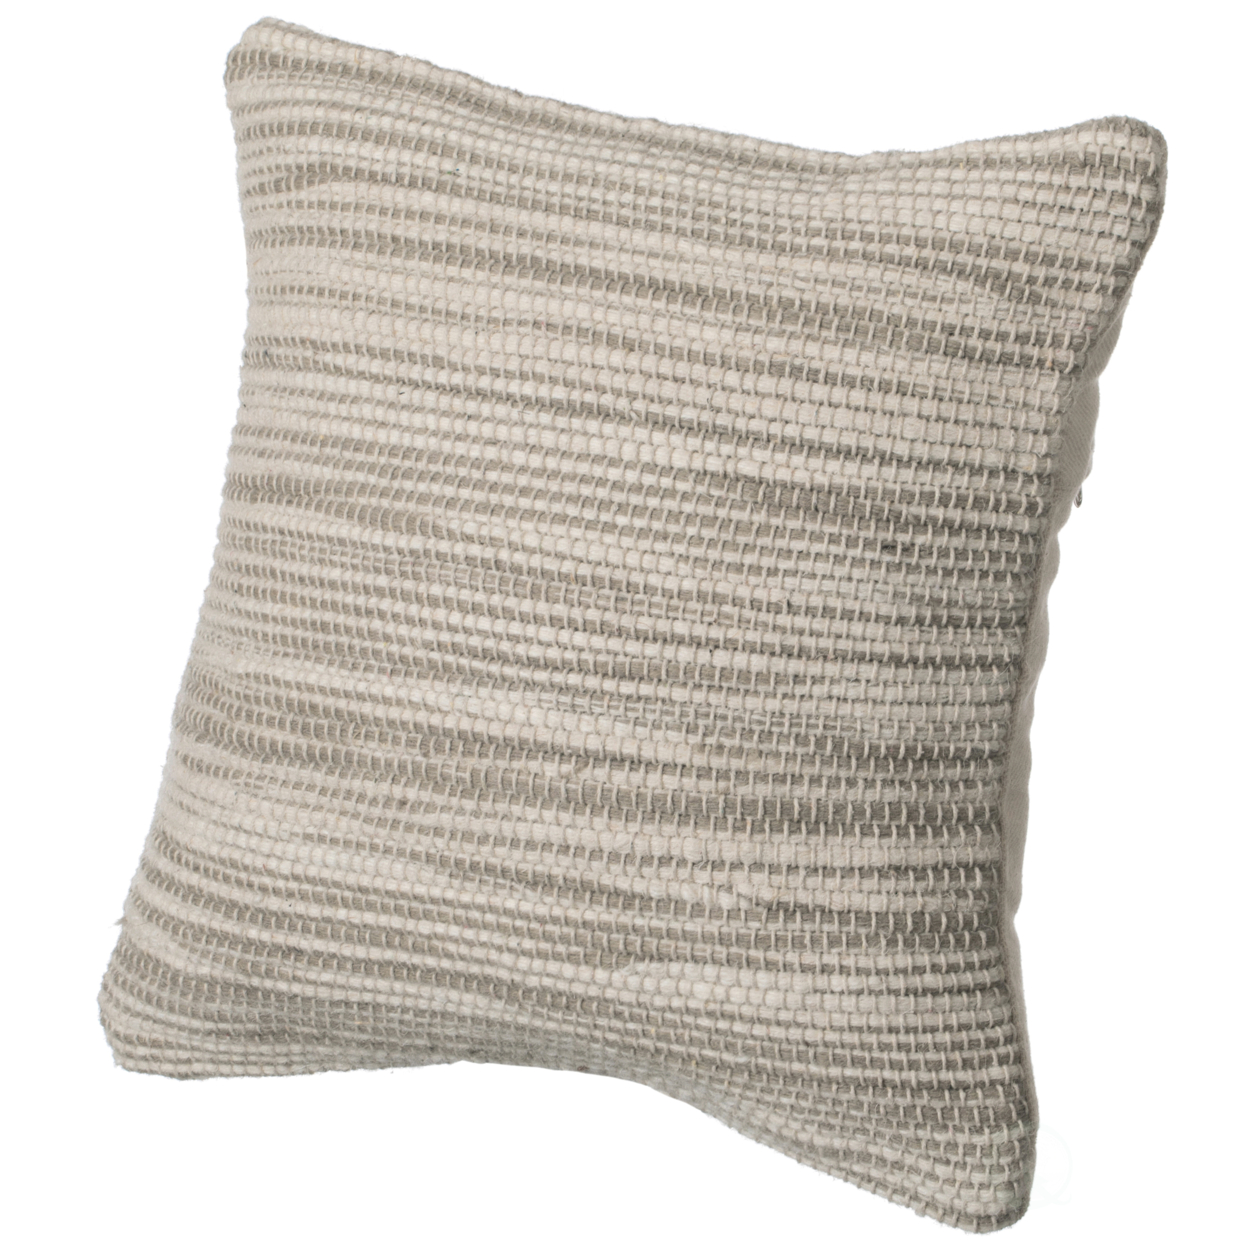 16 Handwoven Wool & Cotton Throw Pillow Cover With Woven Knit Texture - Beige With Cushion